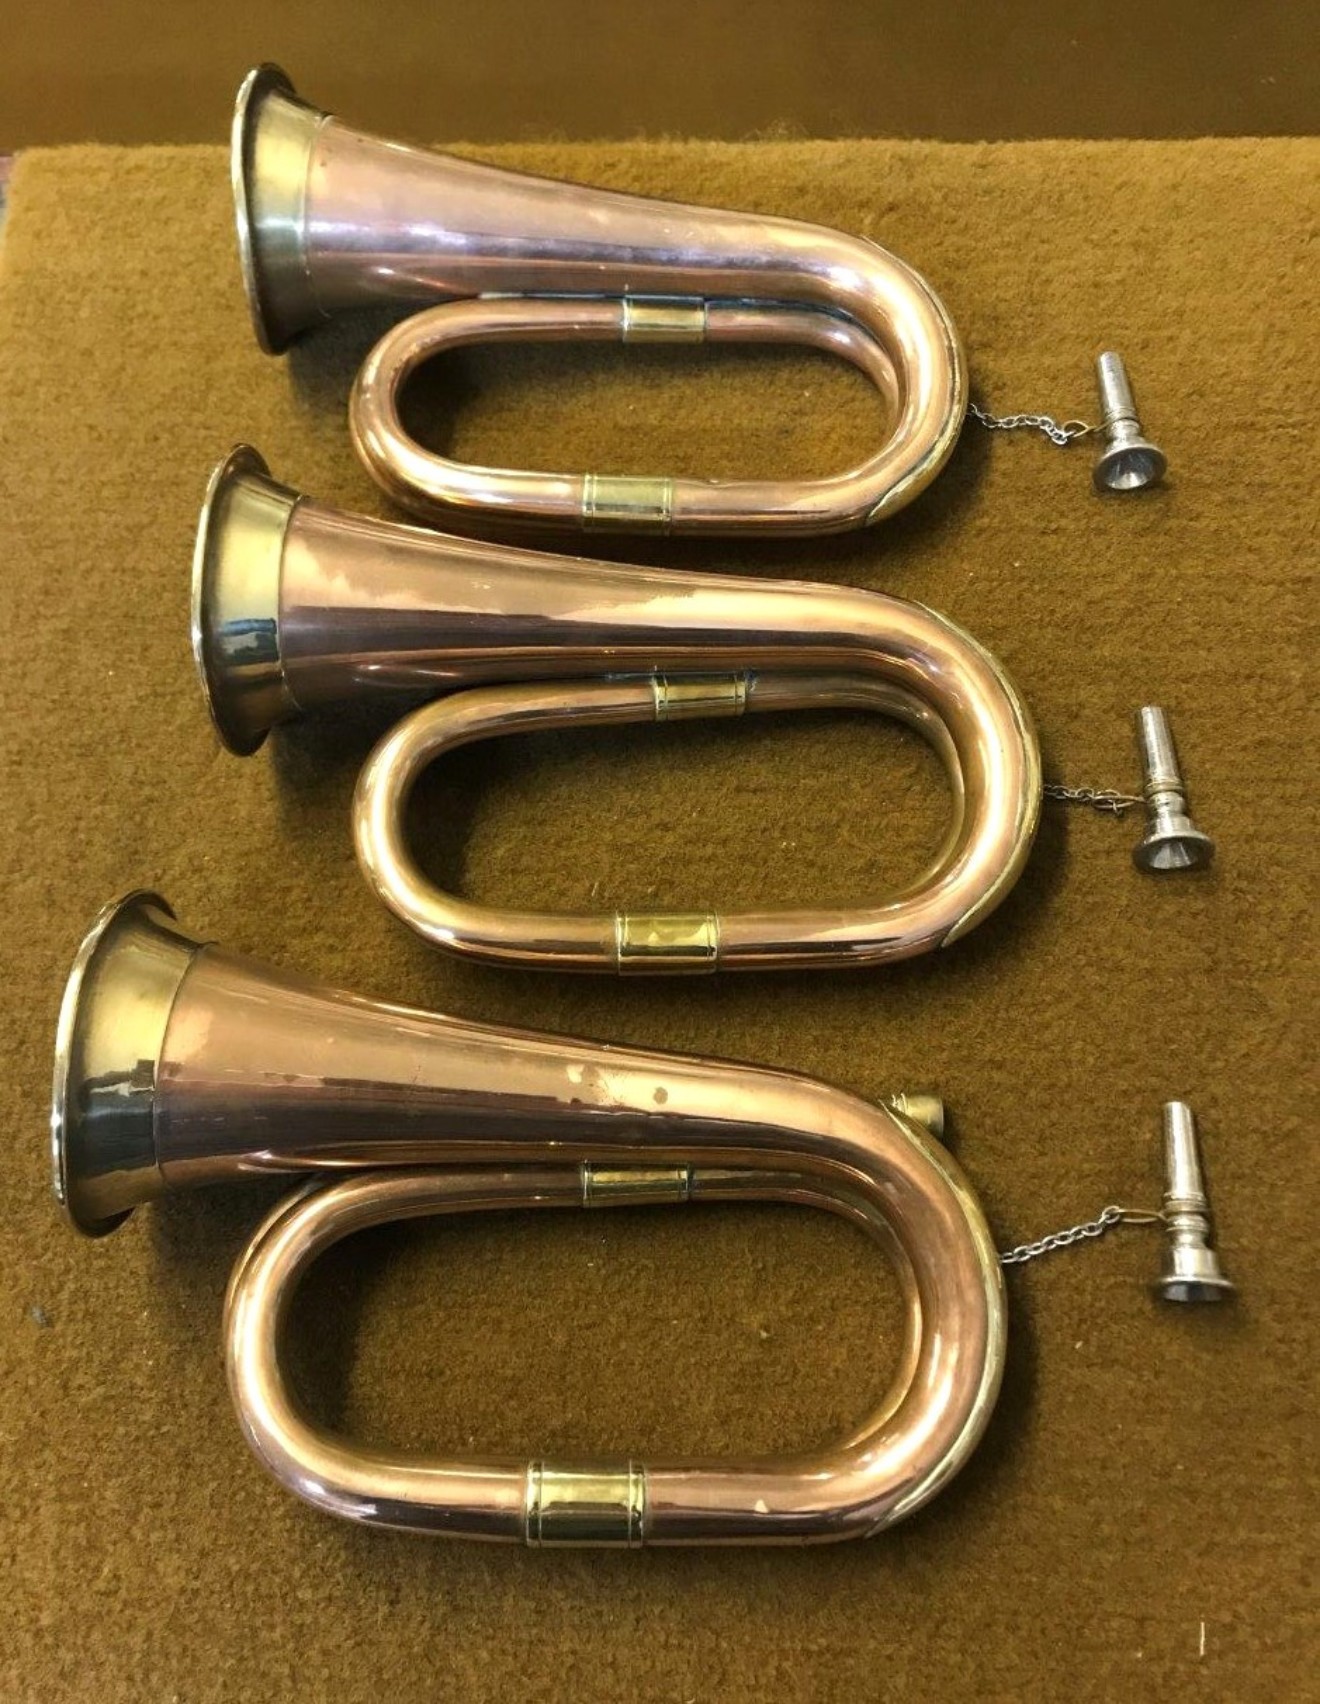 Vintage Set of 3 Military Bugles Copper / Brass with Plated Mouthpiece